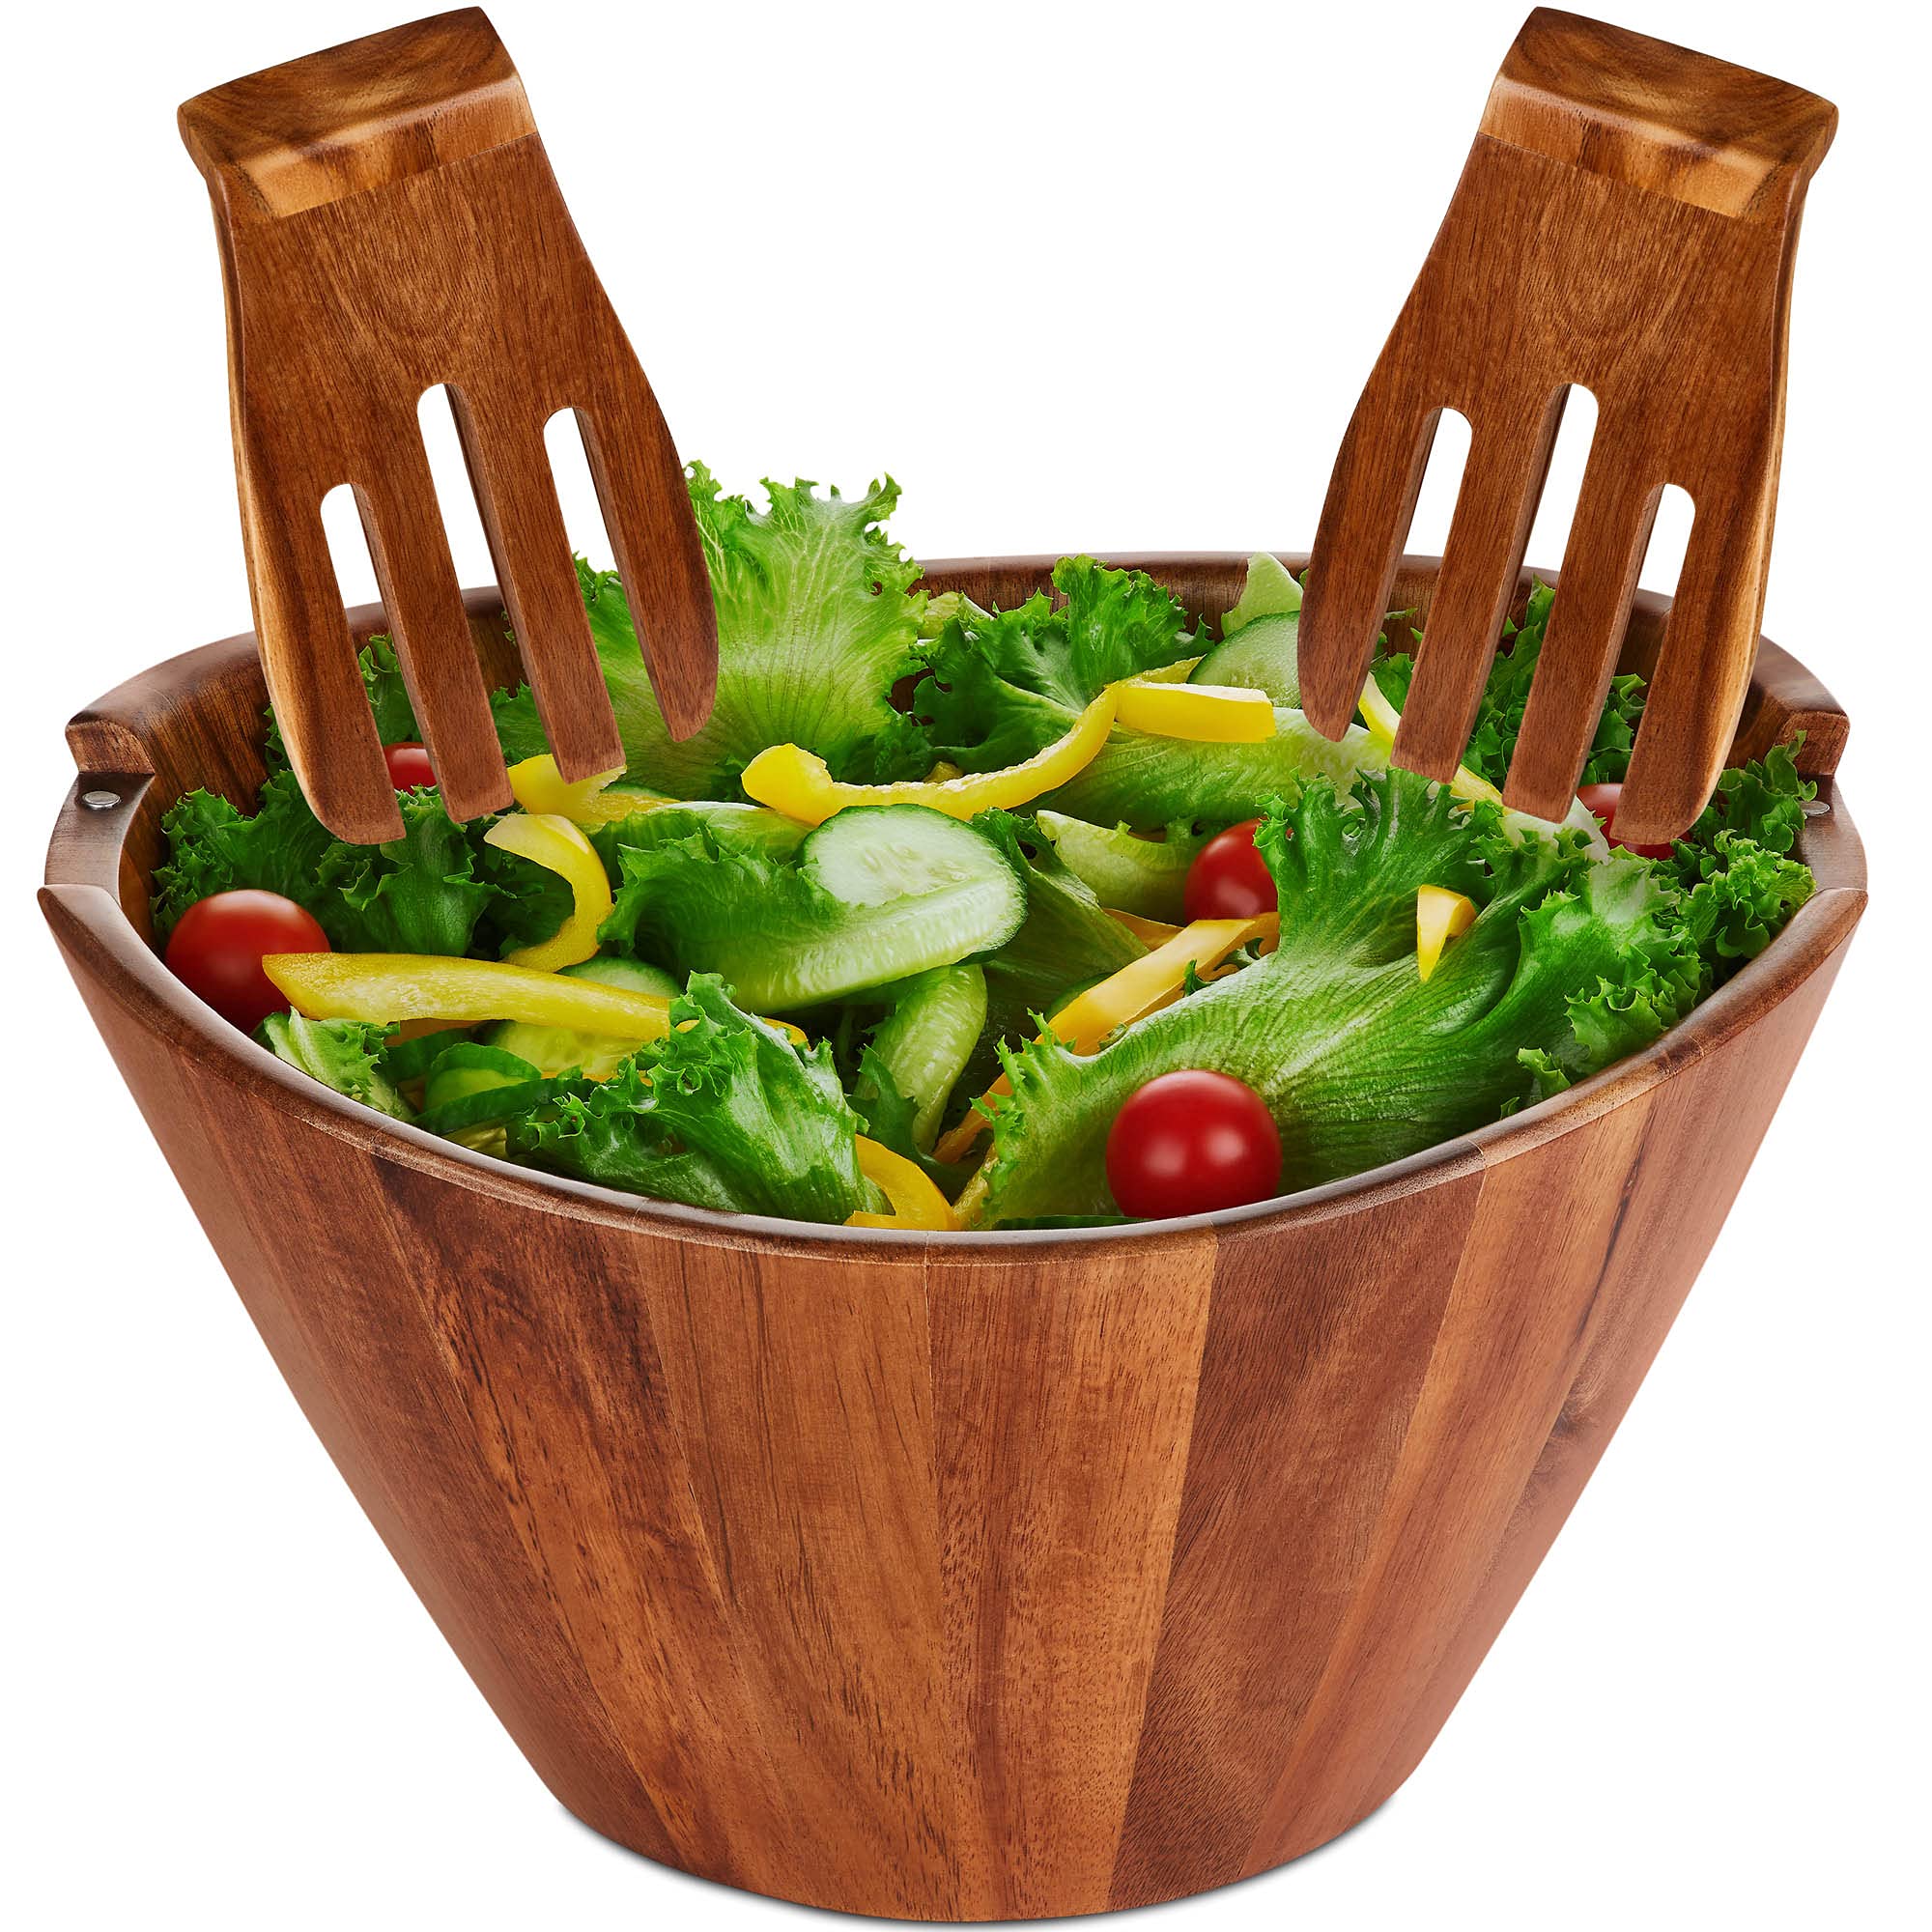 Wooden salad bowl set with serving forks mixing - magnetic serving utensils attached to large acacia wood bowl for 6-8 helpings - unique wood bowl - strong and leak proof with fabric bag